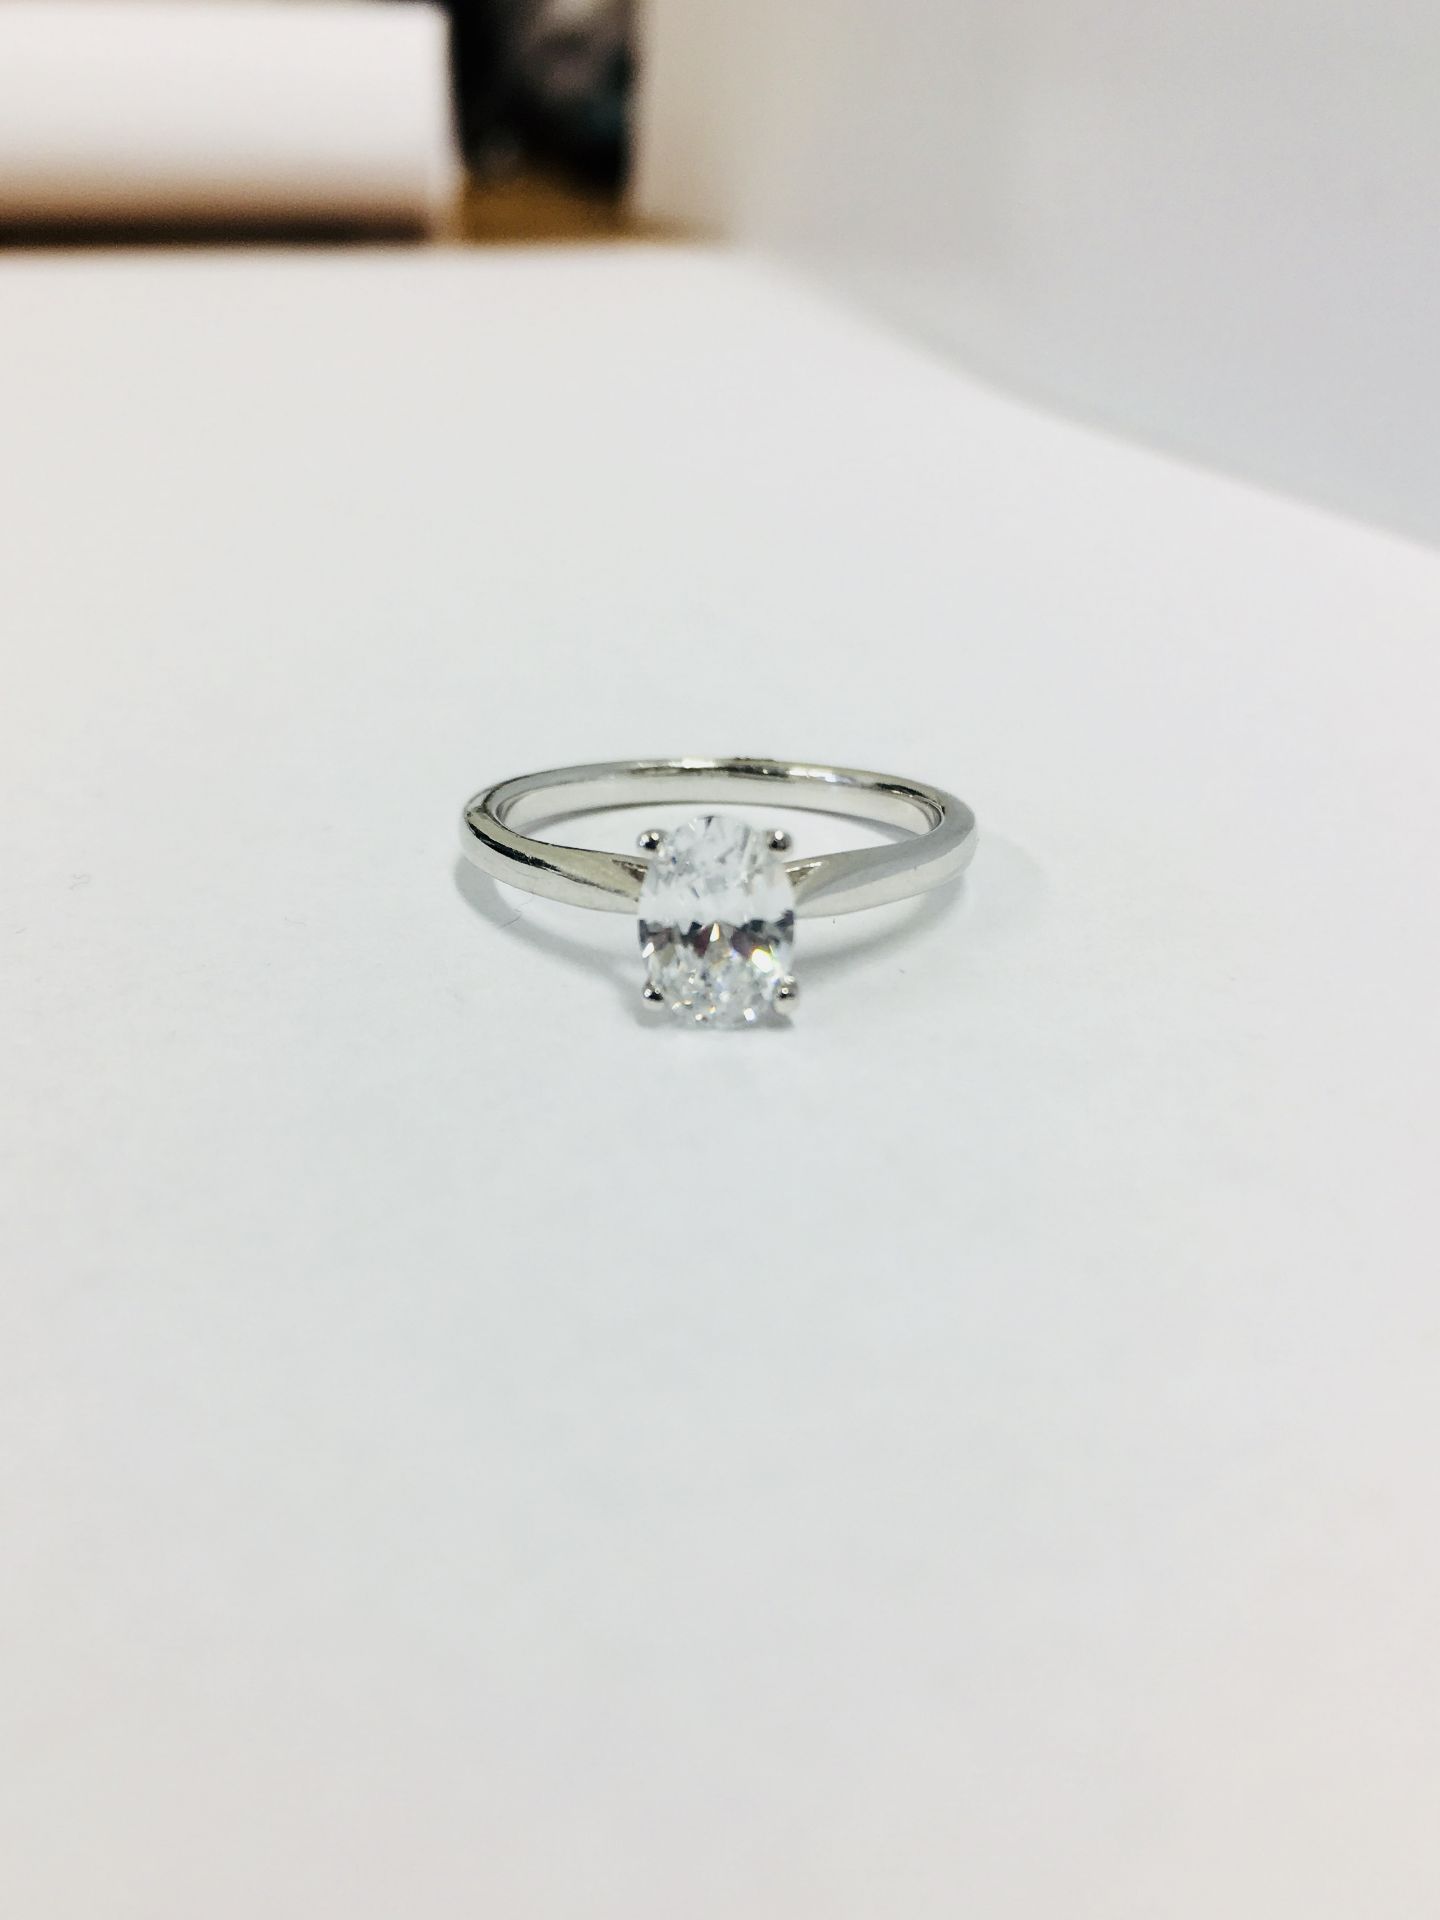 Platinum oval diamond solitaire ring.0.30ct oval diamond si clarity i colour,2.9gms platinum setting - Image 4 of 4